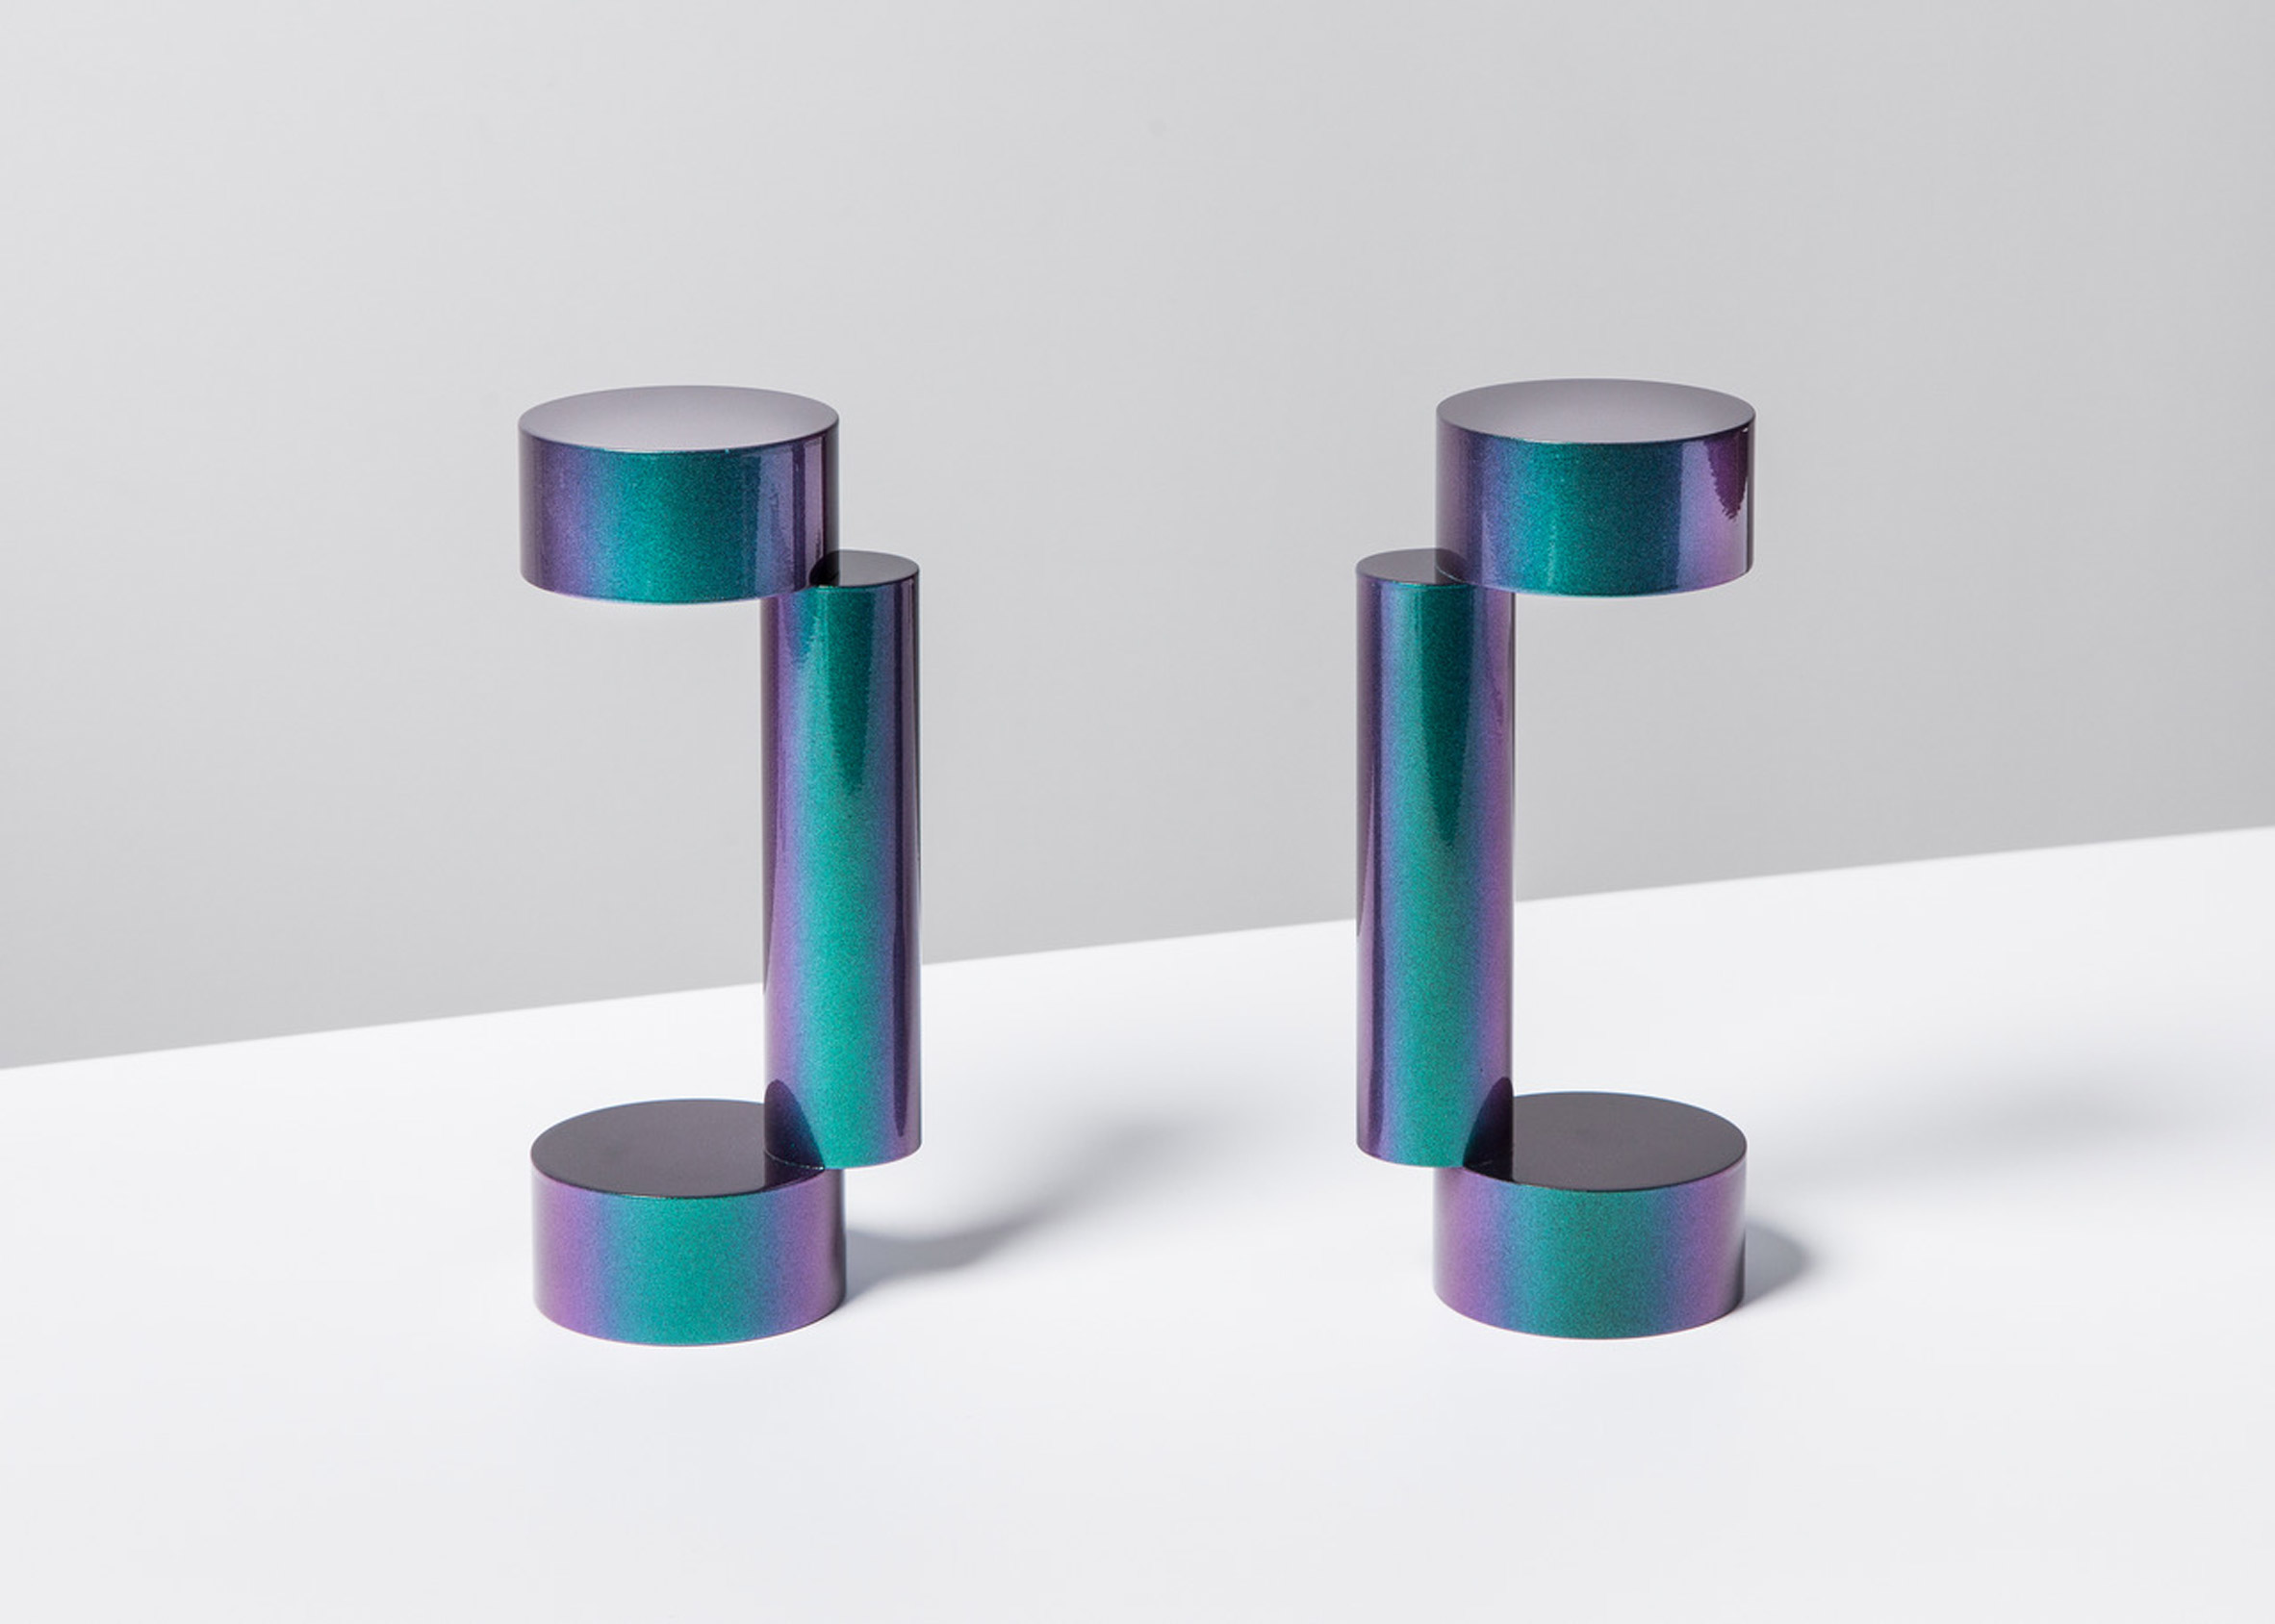 Iridescent free weights double as geometric sculptures